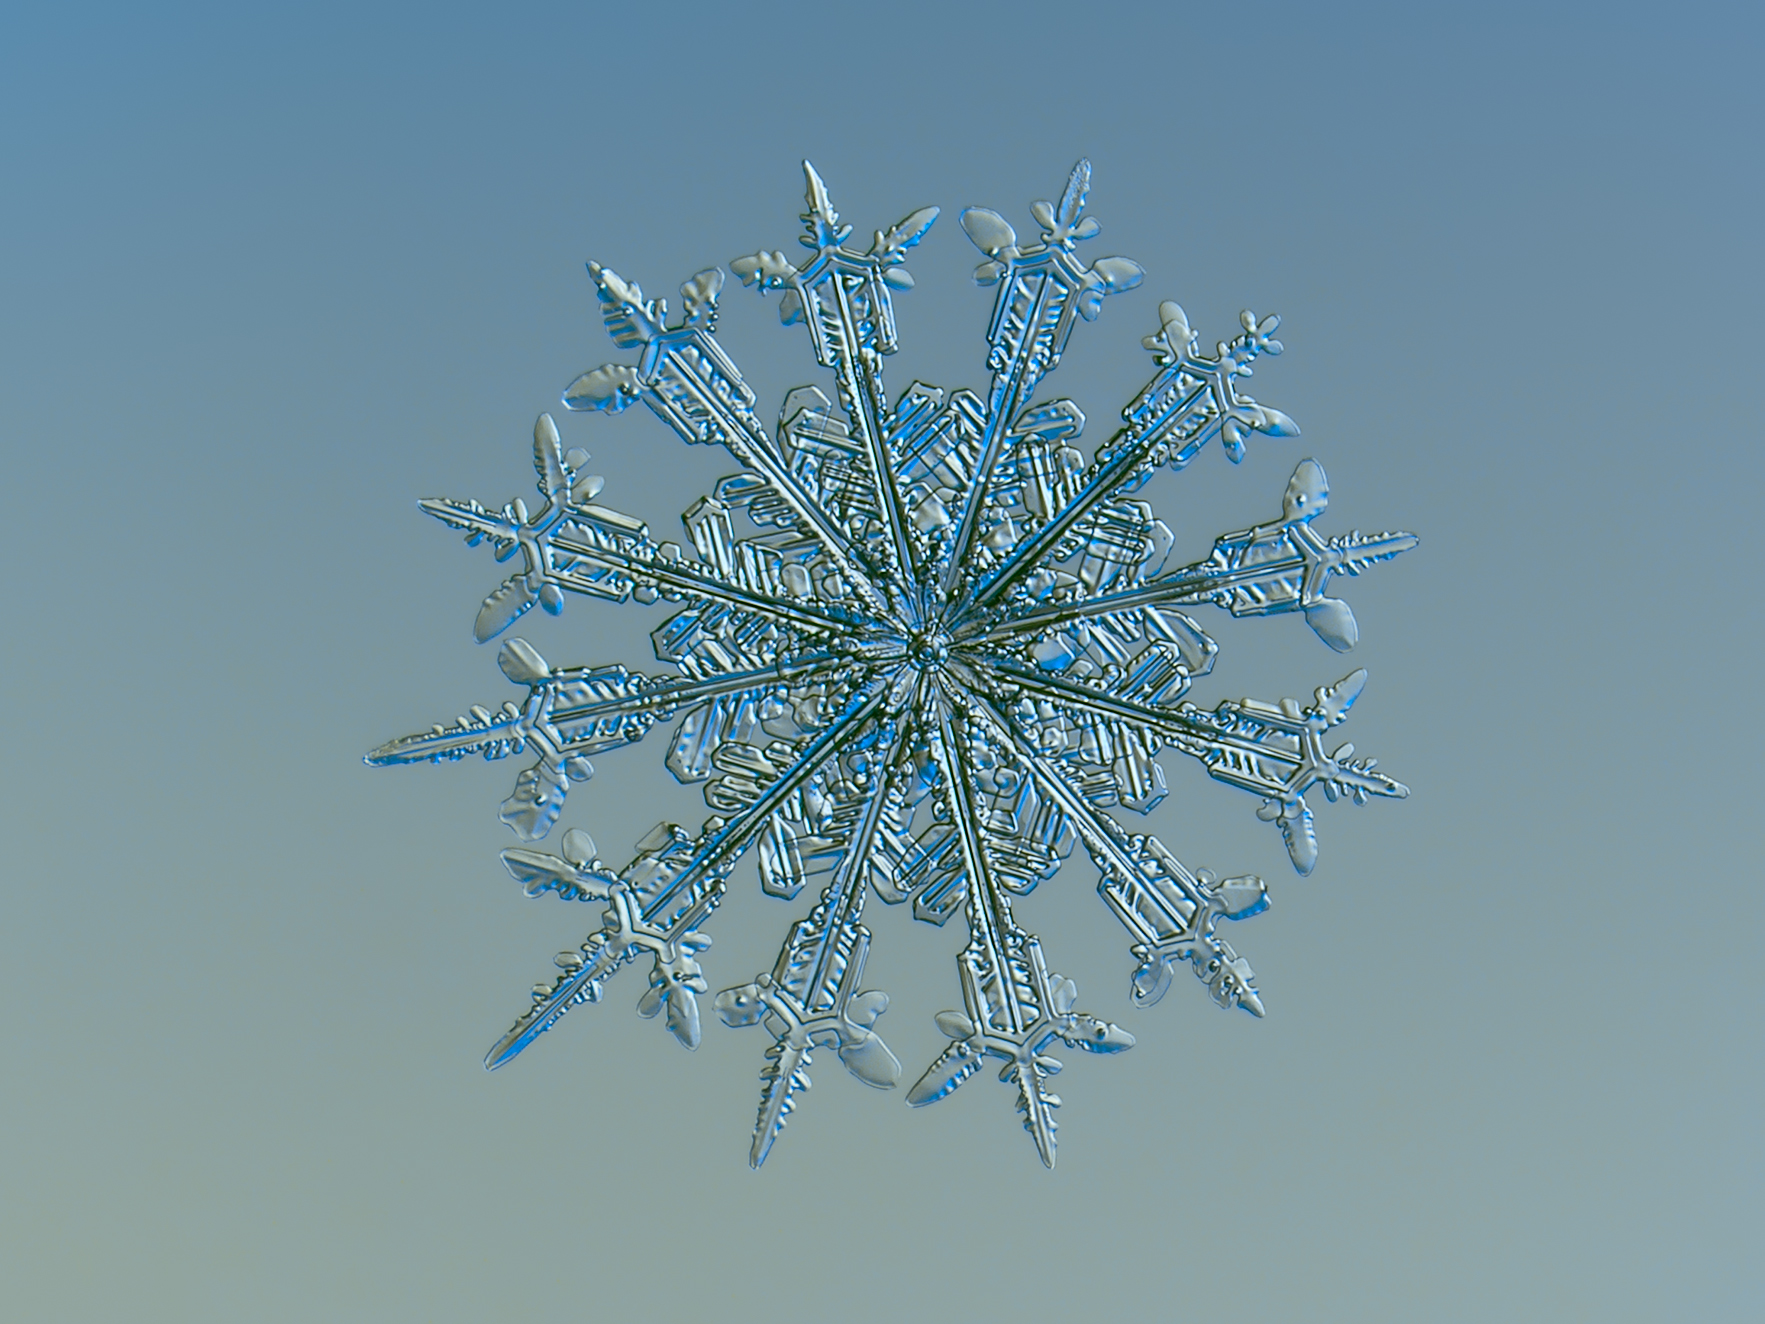 12 stunning snowflake photos you won't believe were taken by an ...